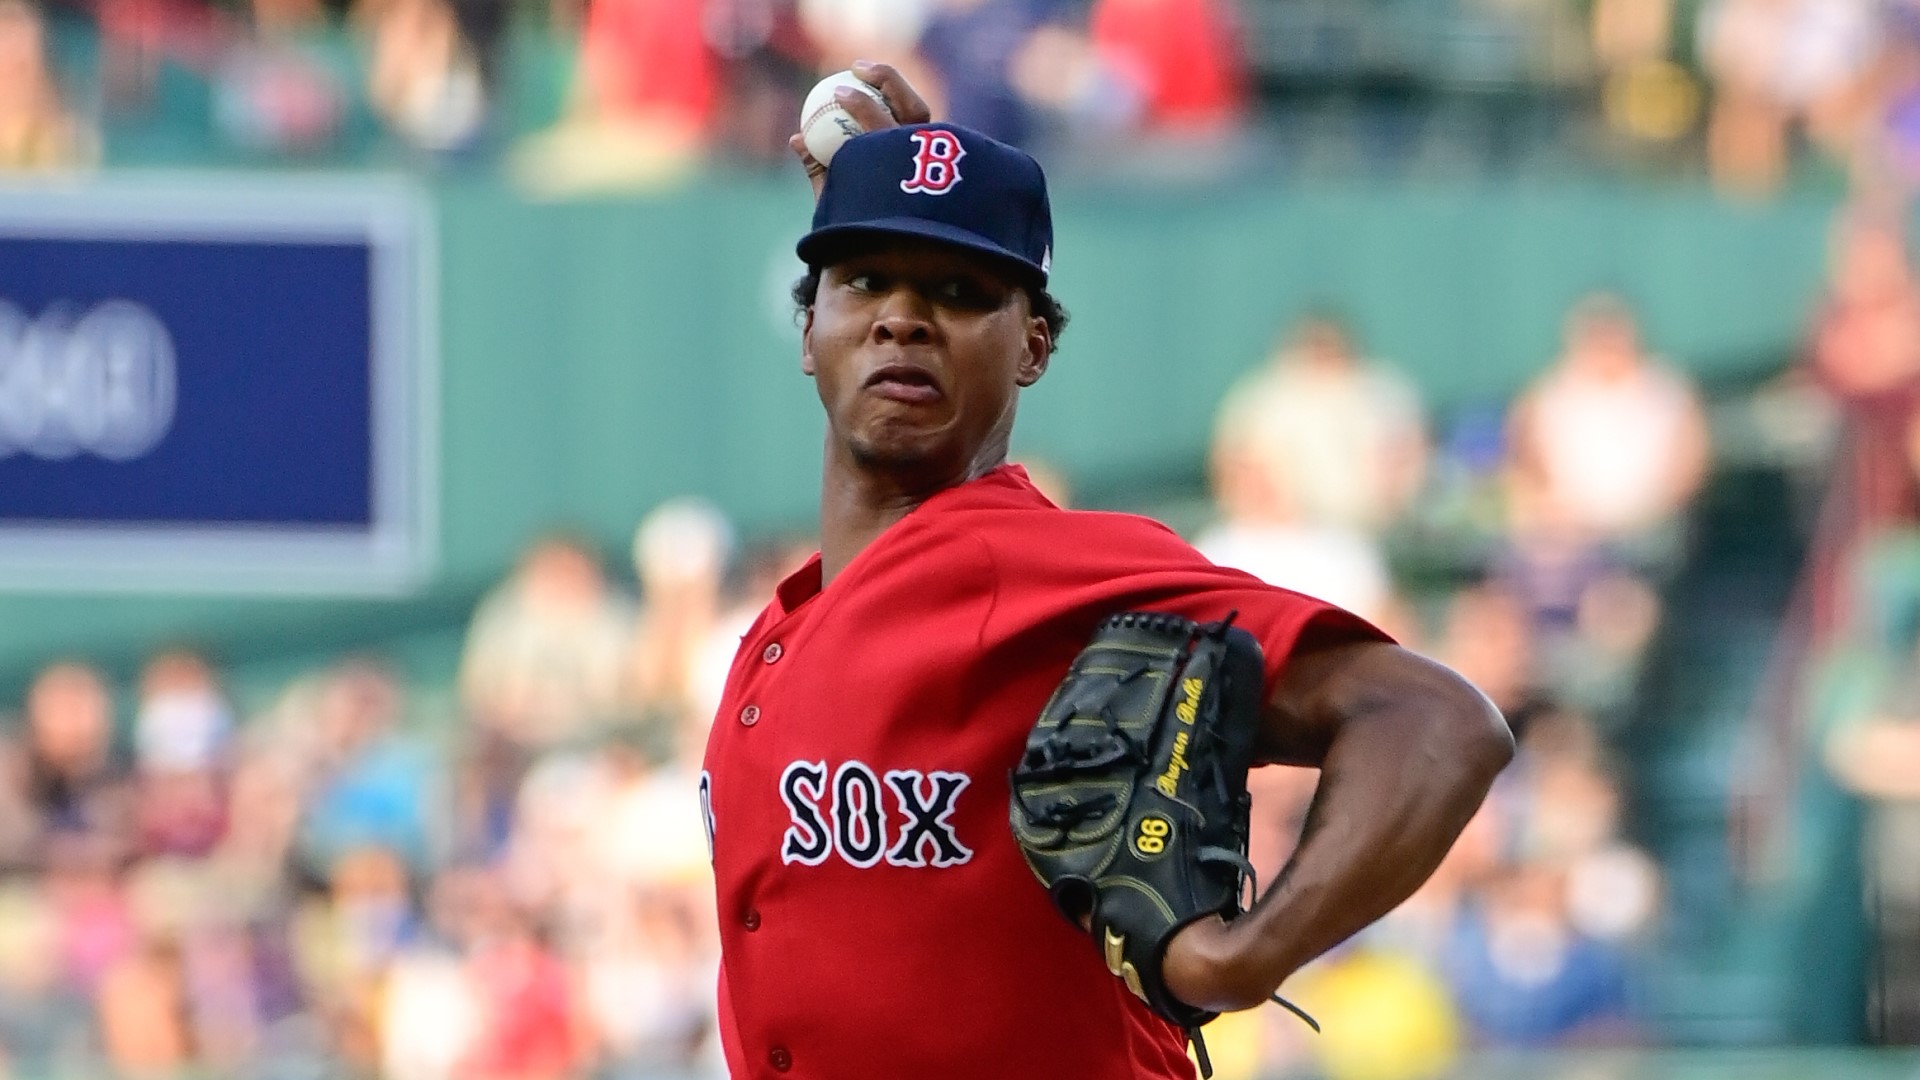 Why was Brayan Bello demoted? The Red Sox felt they could help